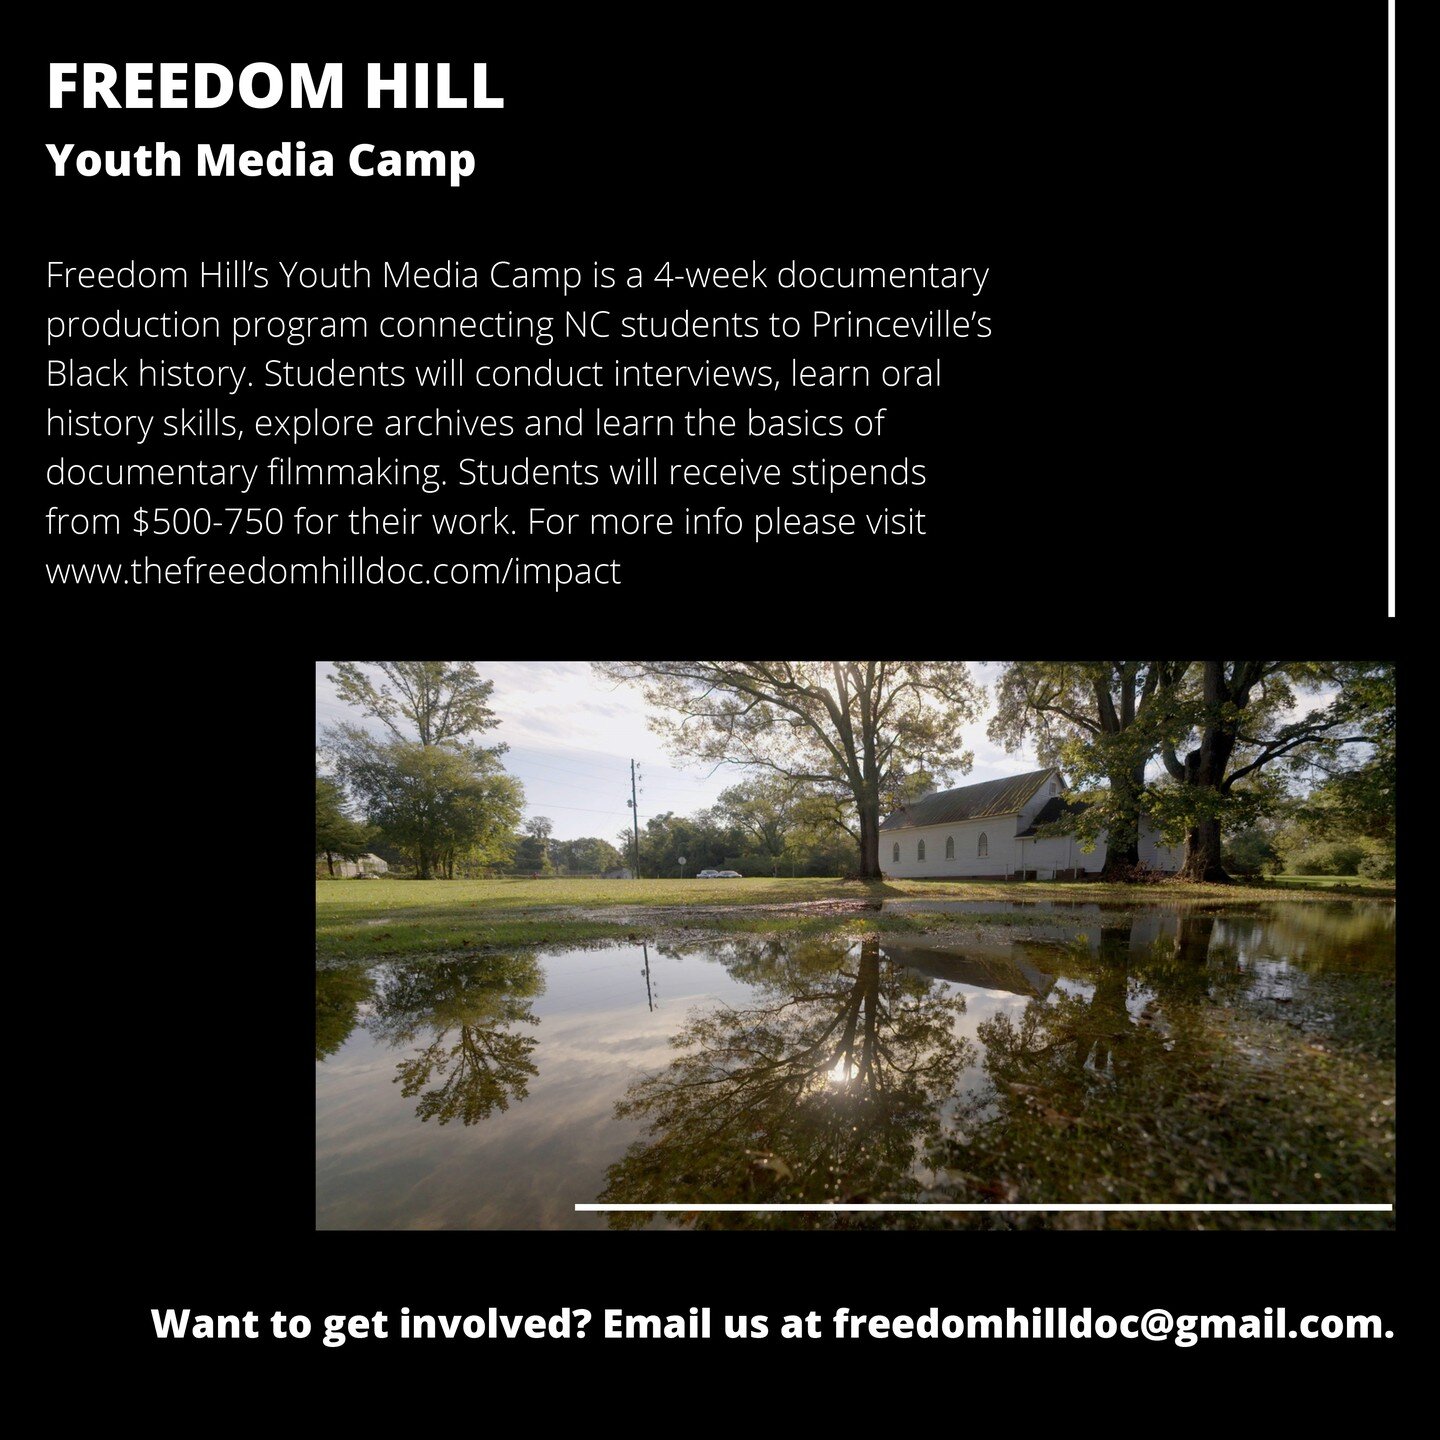 Join @FreedomHillDoc&rsquo;s Youth Media Camp! The Youth Media Camp is a 4-week documentary production program connecting NC students to Princeville&rsquo;s Black history. 

Students will receive stipends from $500-750 for their work. You must be bet